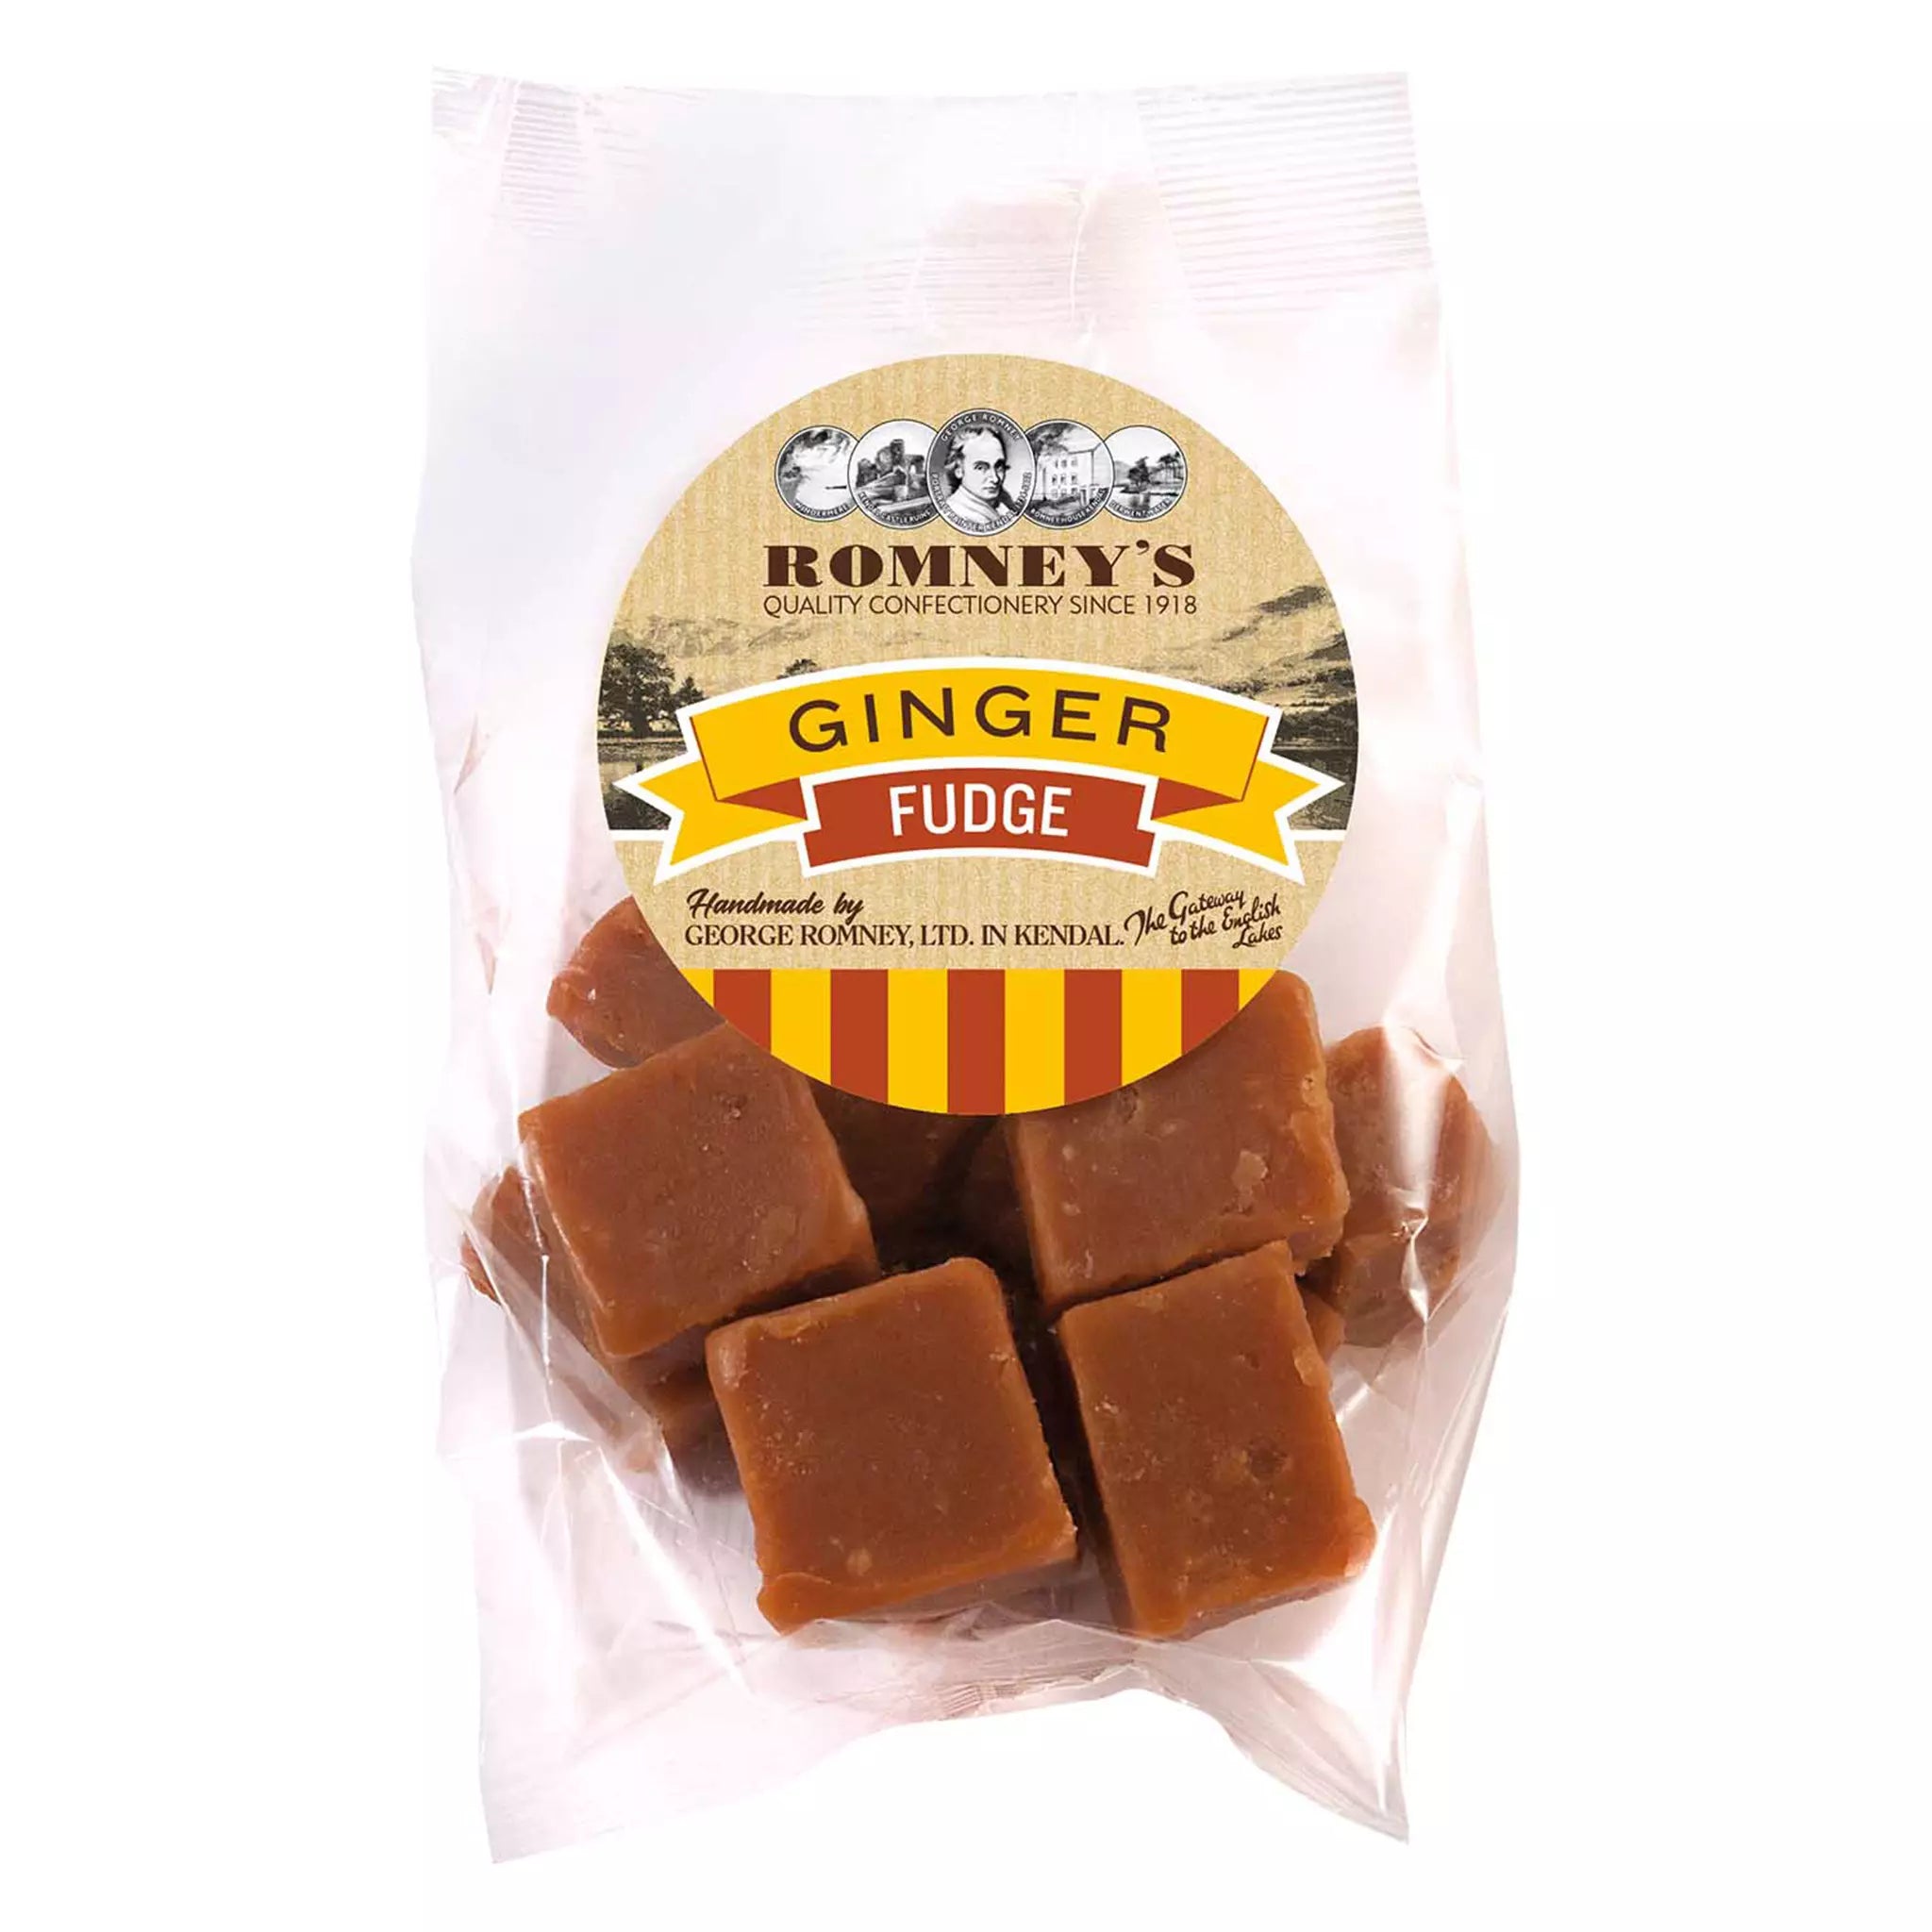 A transparent bag containing pieces of Fudge. The bag has a label on it that shows Romney's logo and says 'Ginger Fudge'.